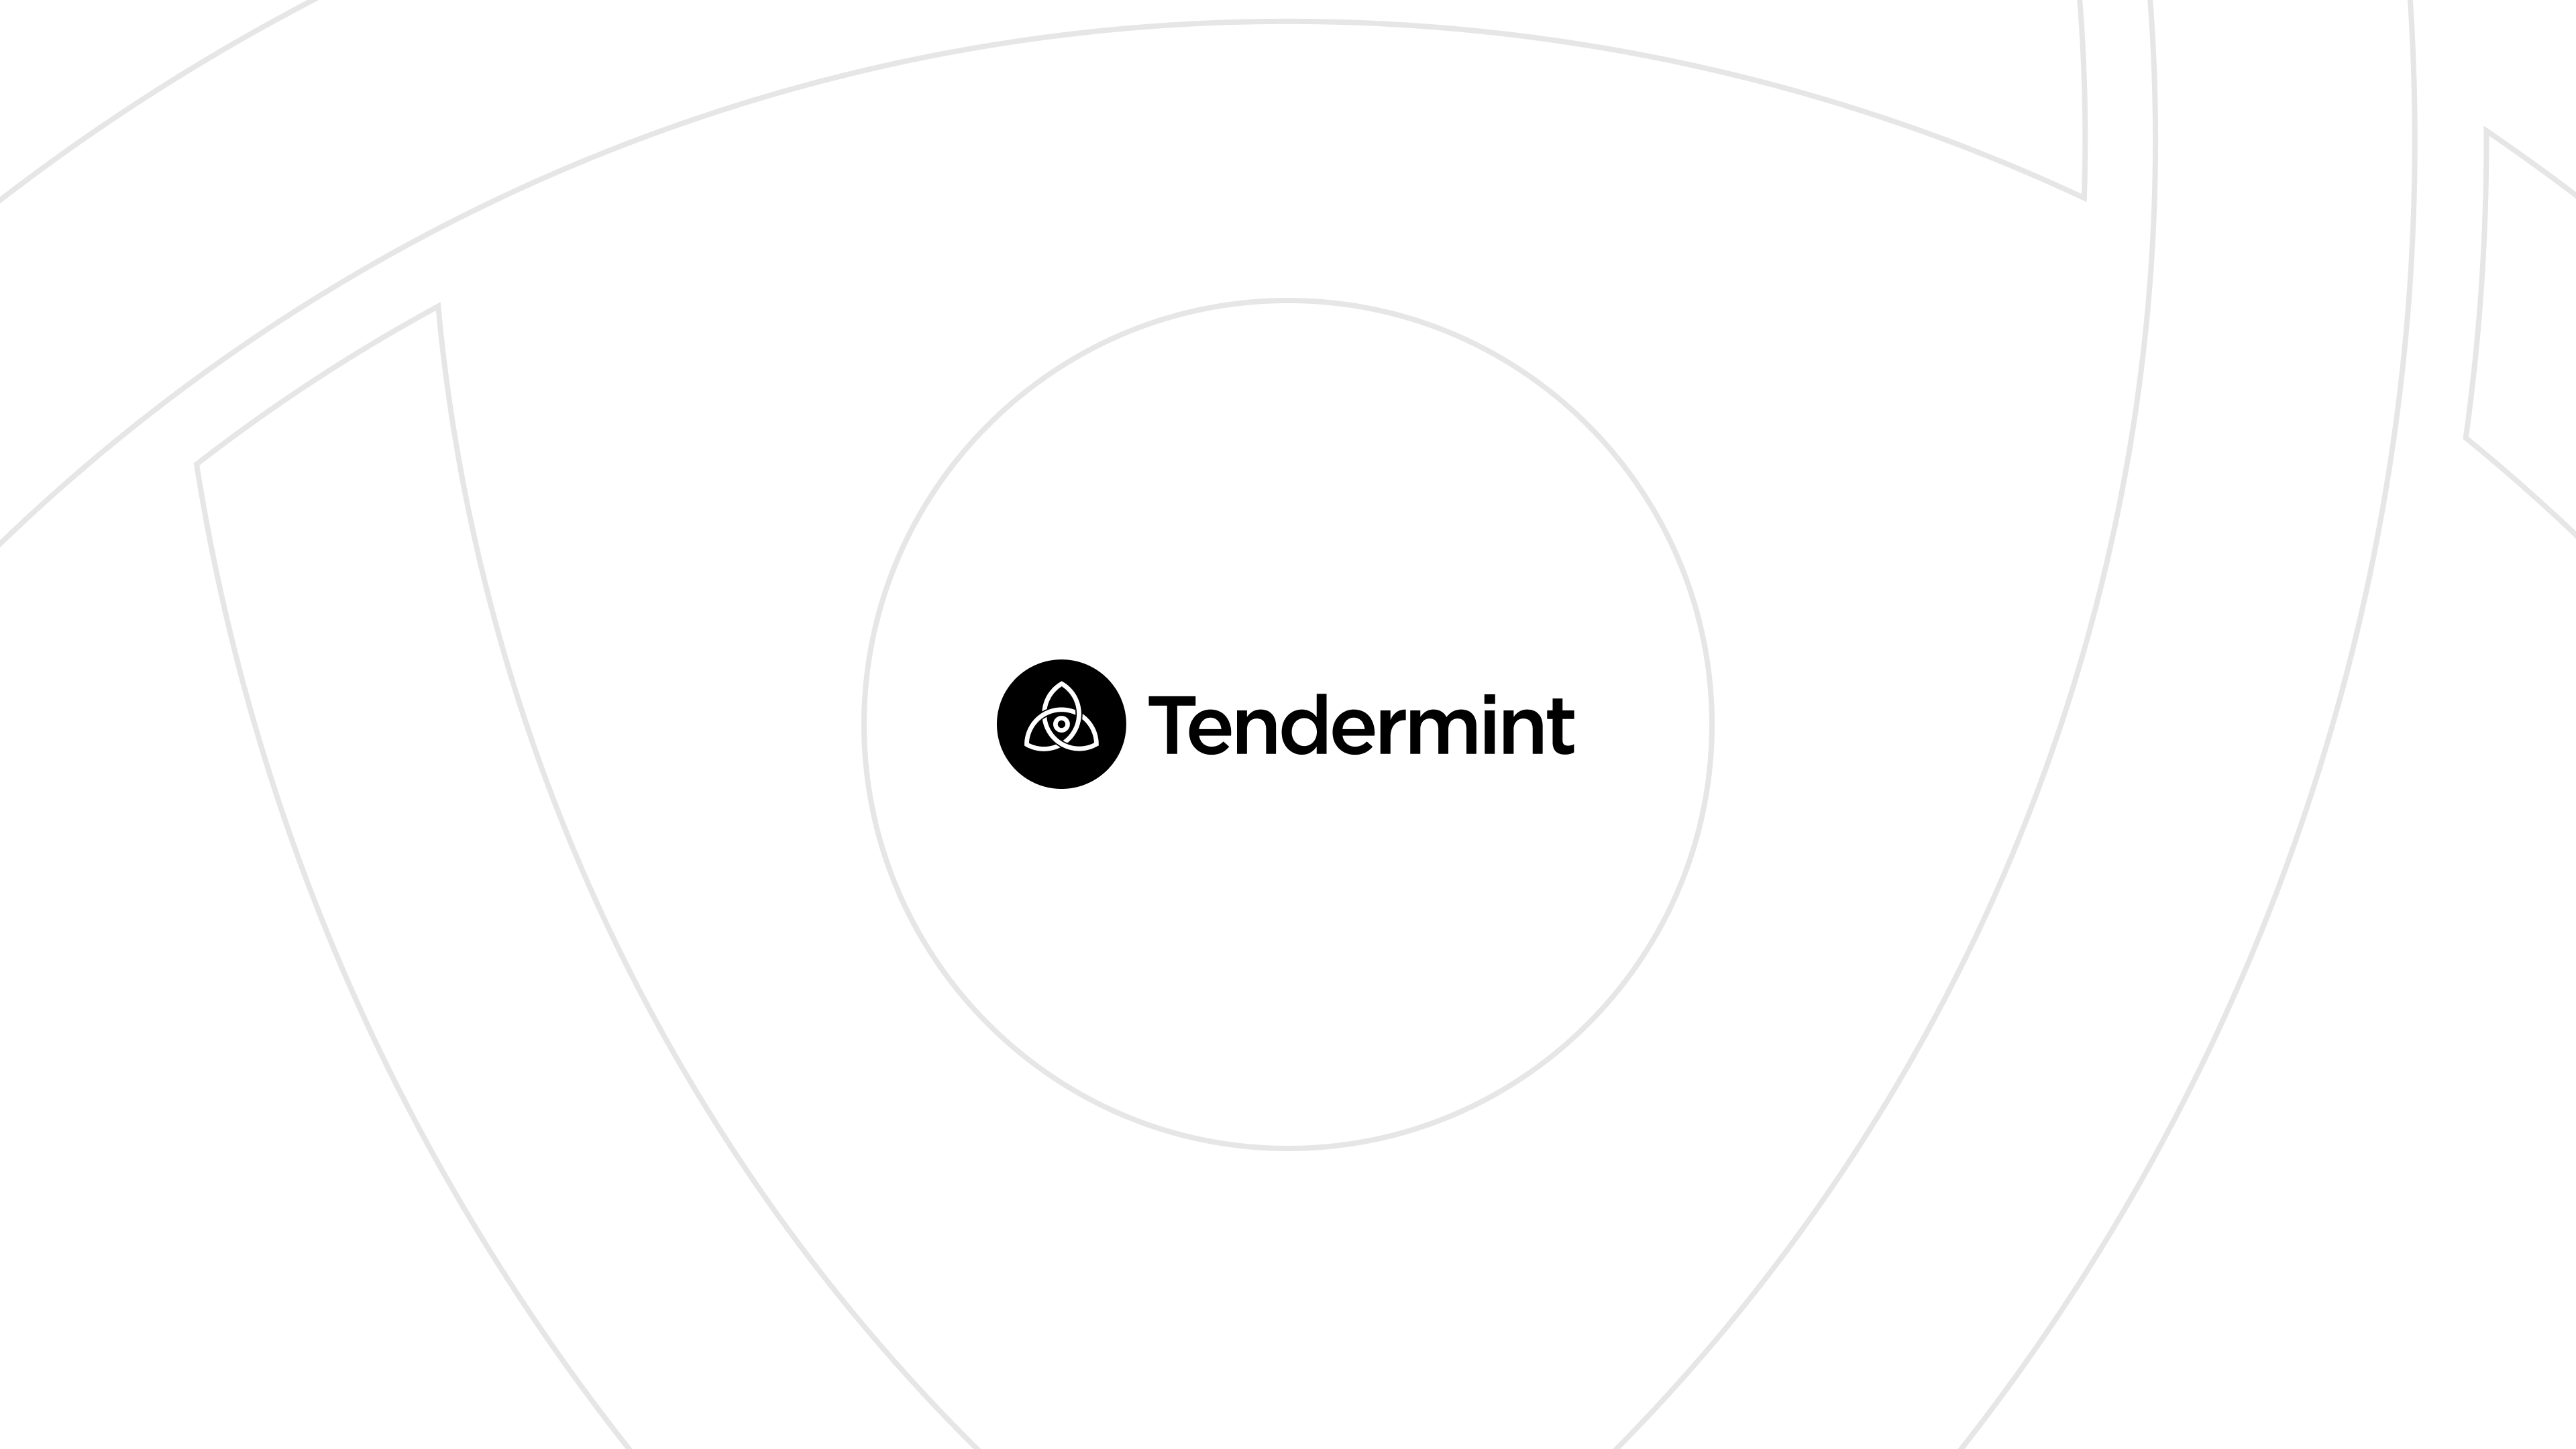 Working at Tendermint - Build the Most Powerful Tools for Distributed Networks